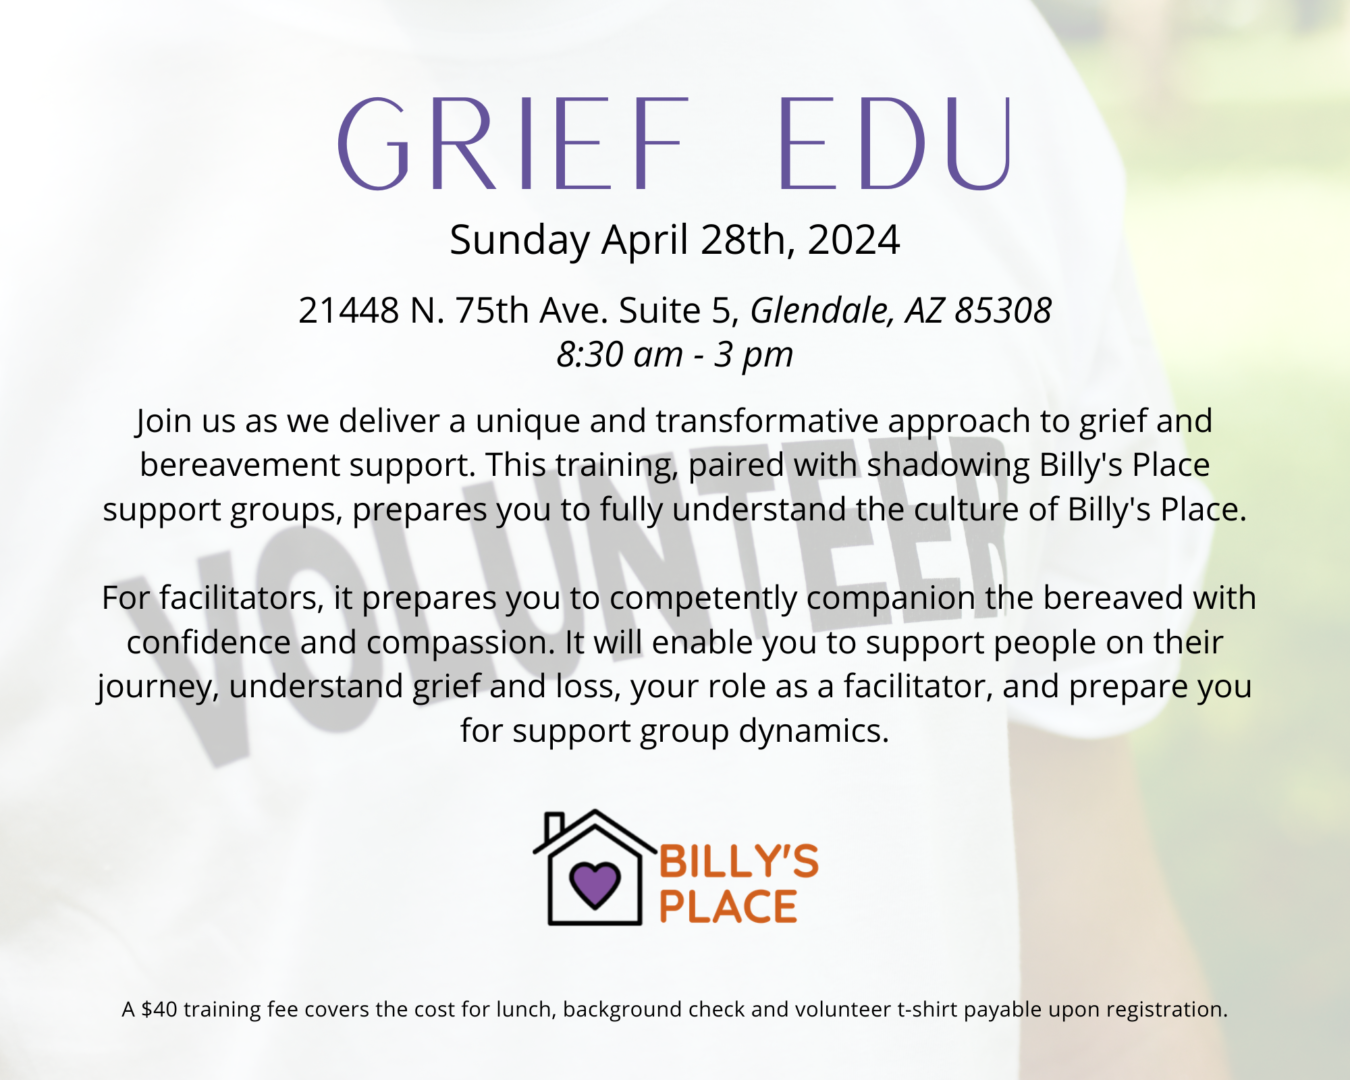 Invitation flyer for a grief education and support workshop at billy's place in glendale, az, with details on date, time, and registration fees against a tranquil background.